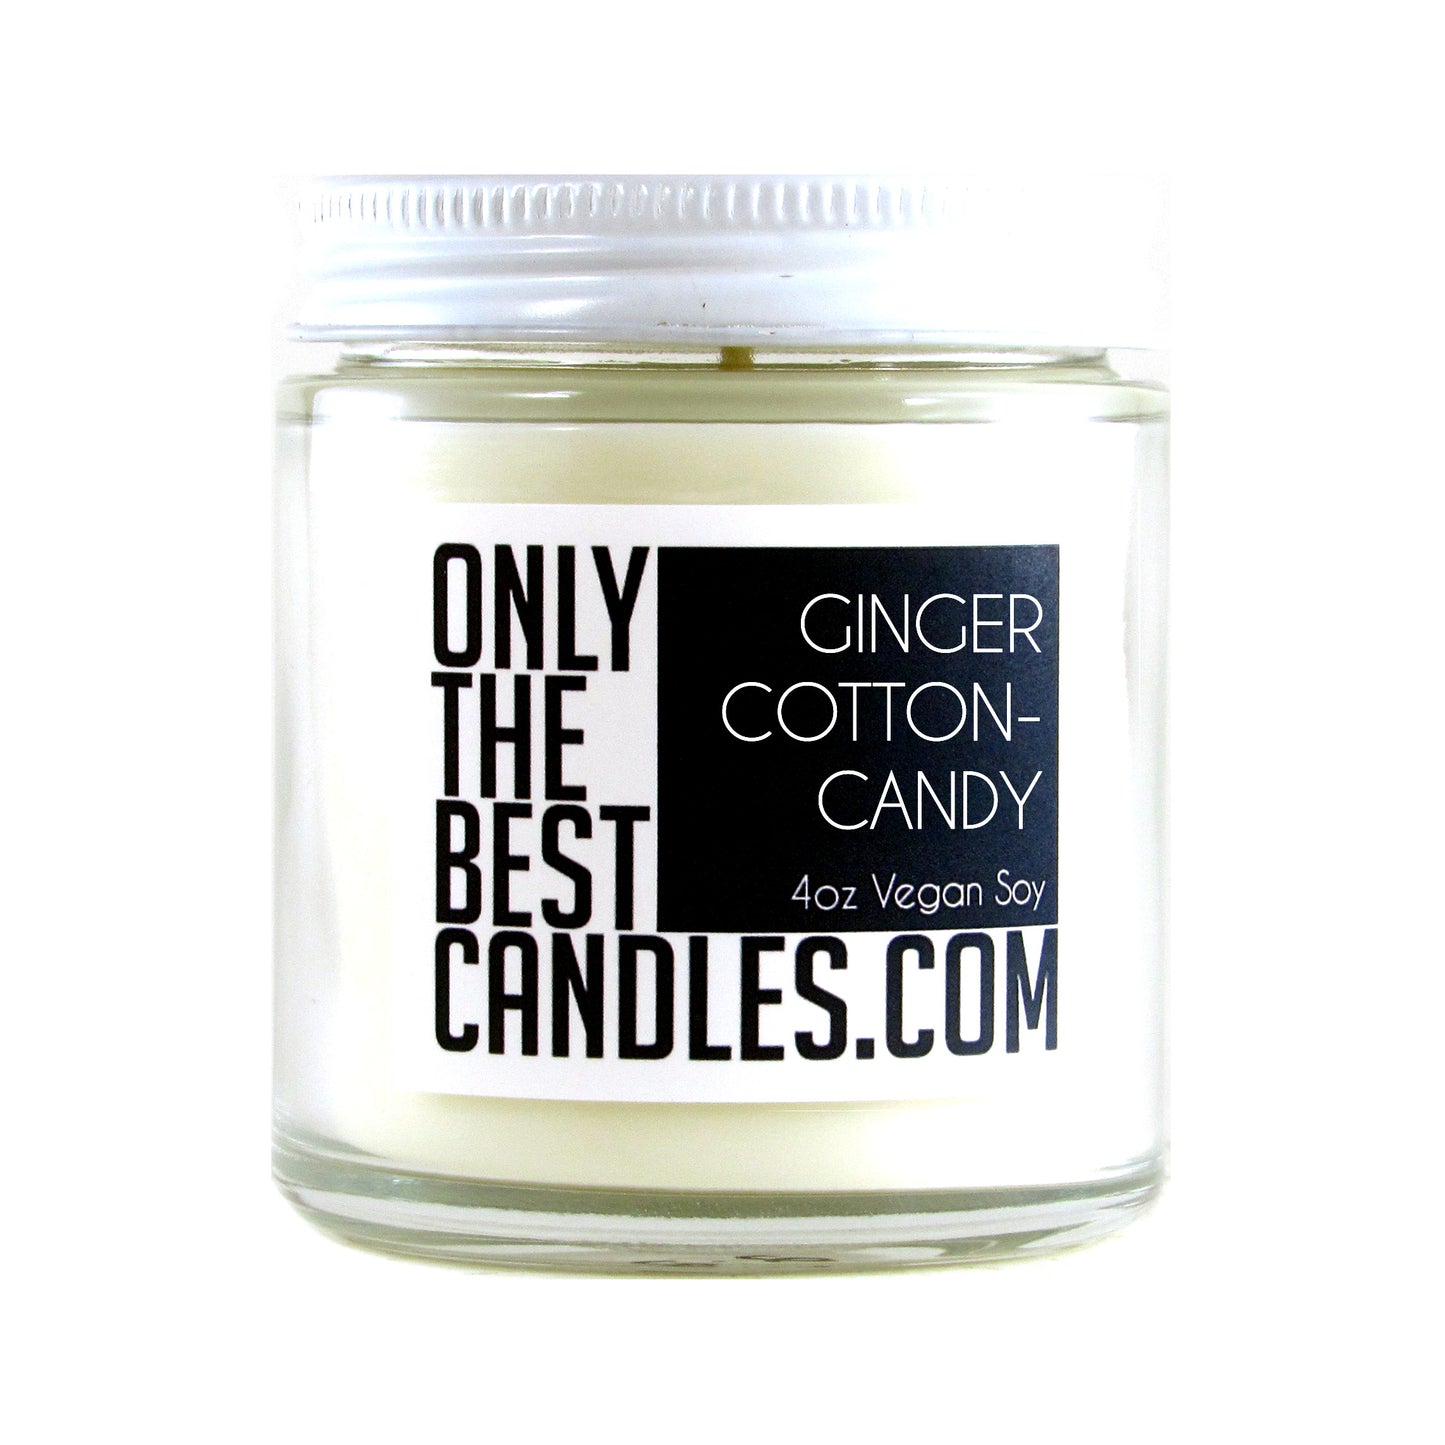 Ginger Cotton Candy 4oz Candle